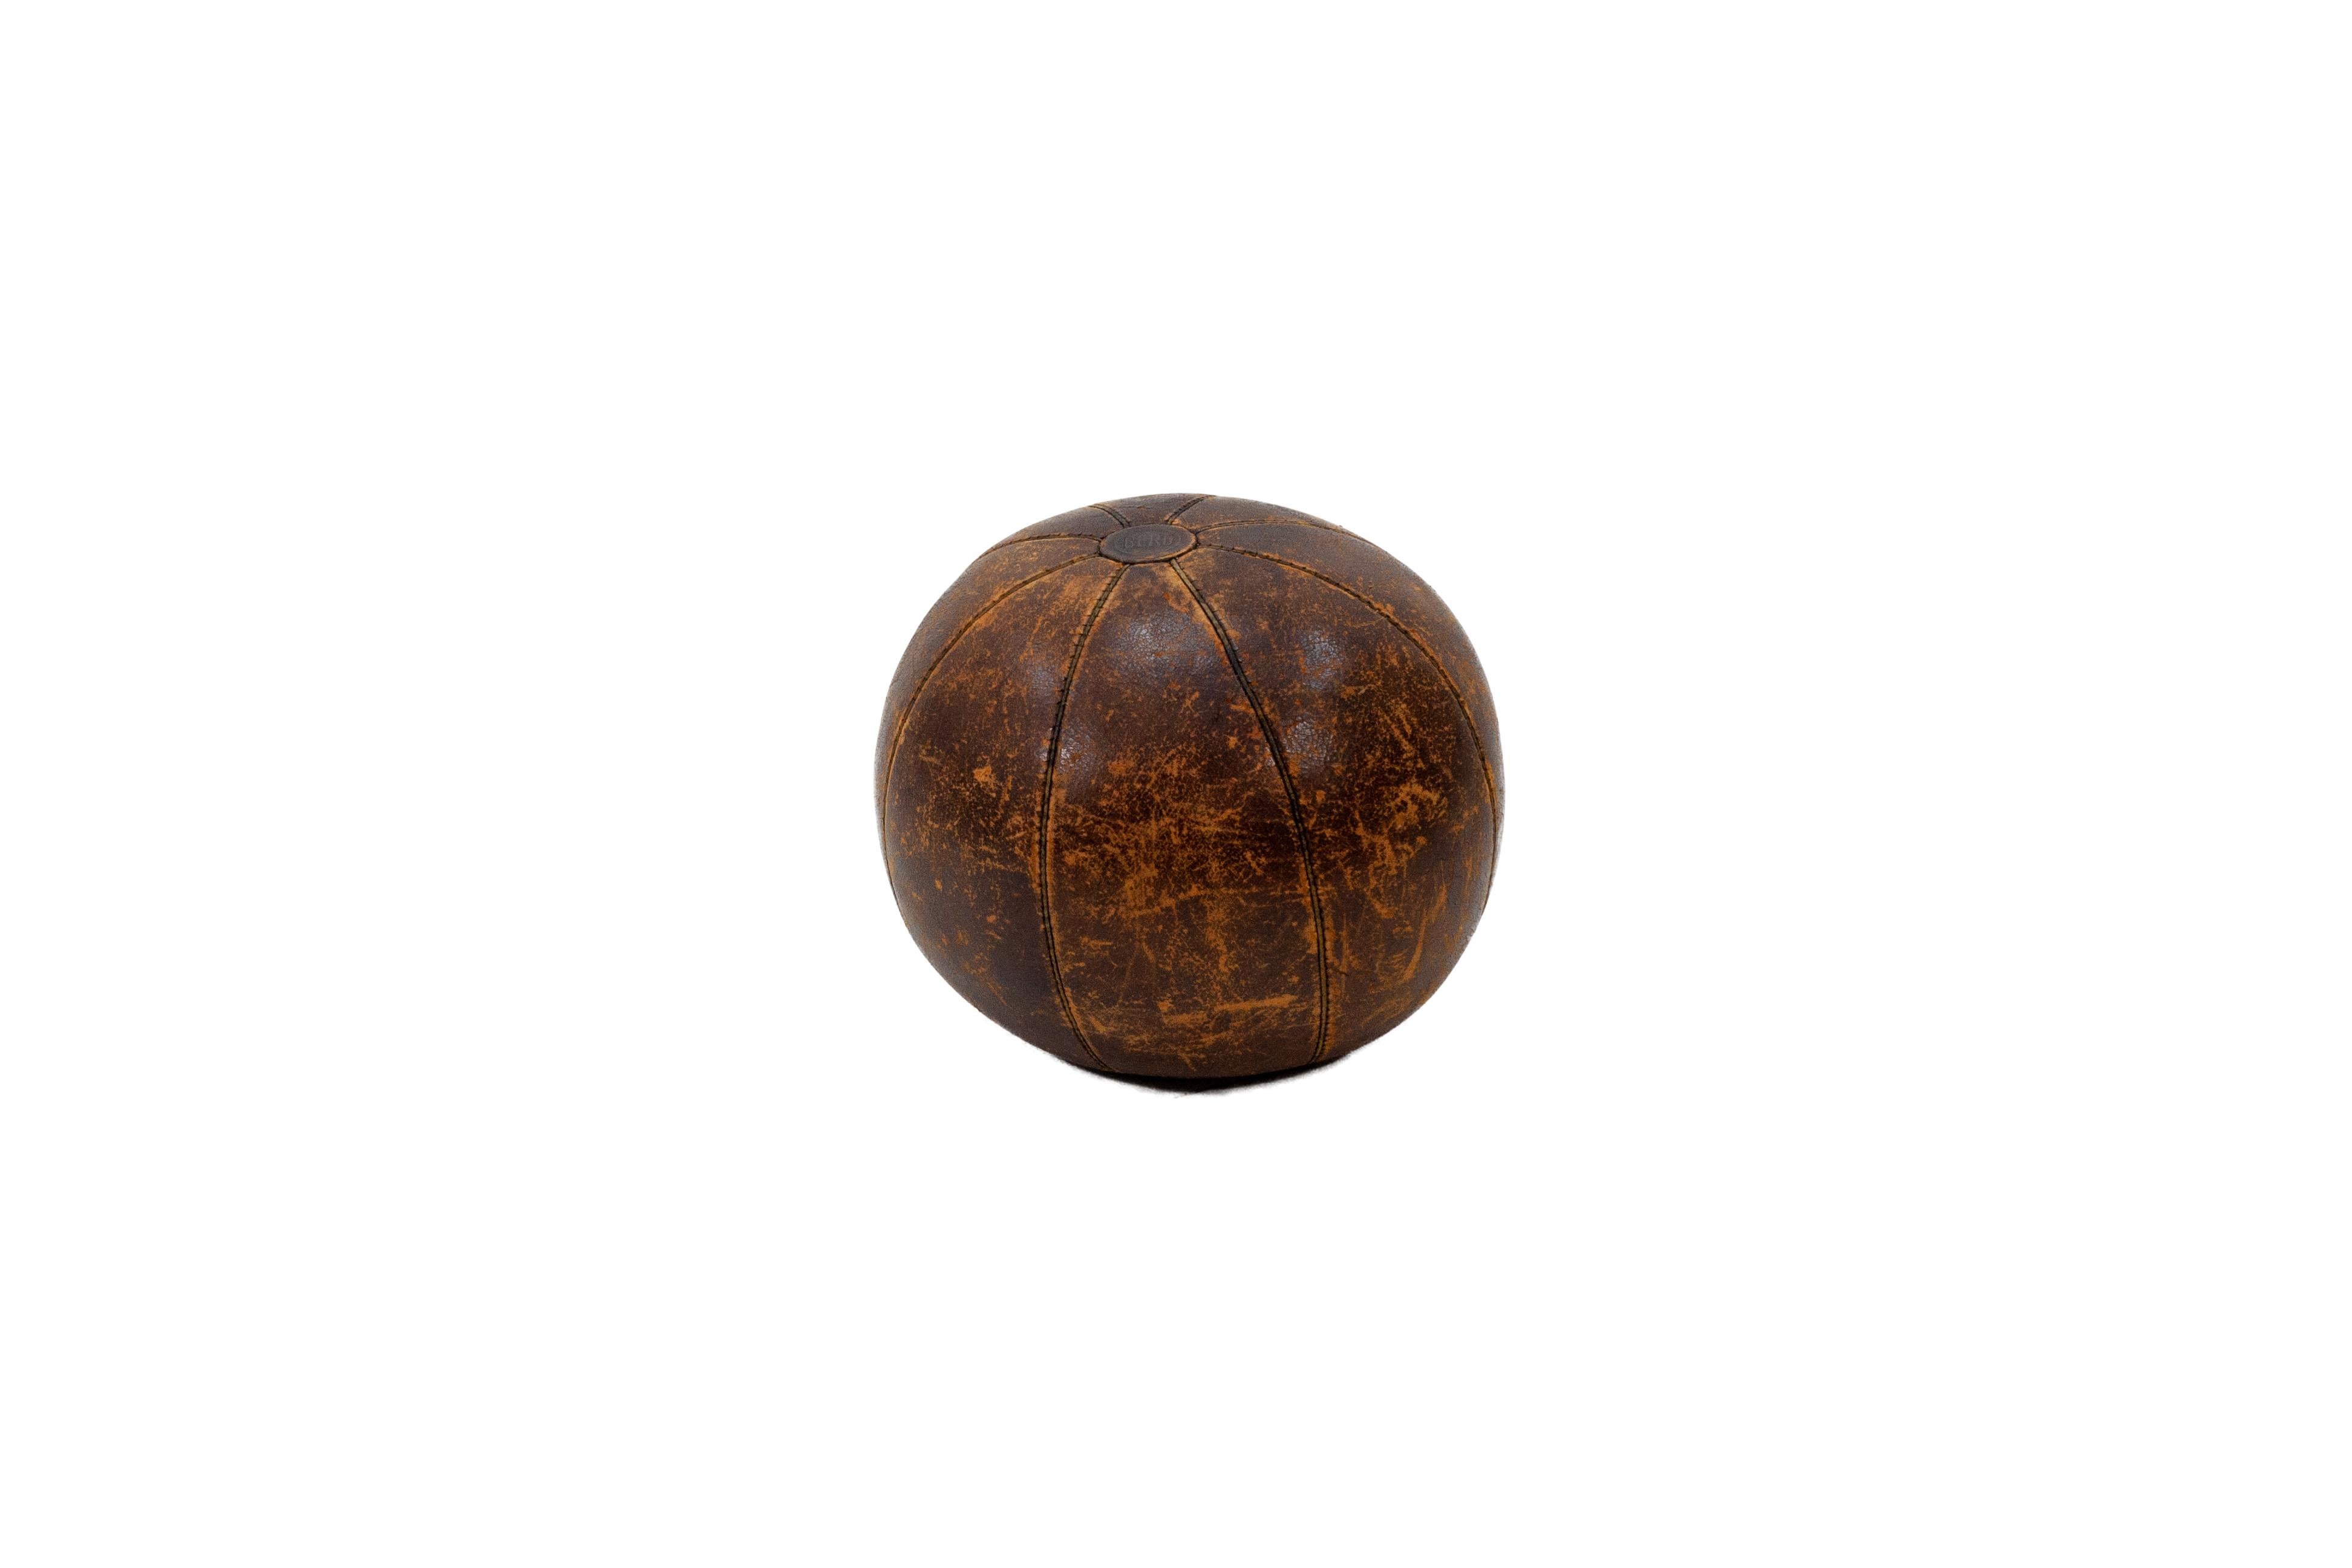 Large medicine ball from the 1920s or 1930s. Leather outer with horsehair filling. From the German Berg brand. Very decorative item in good condition.